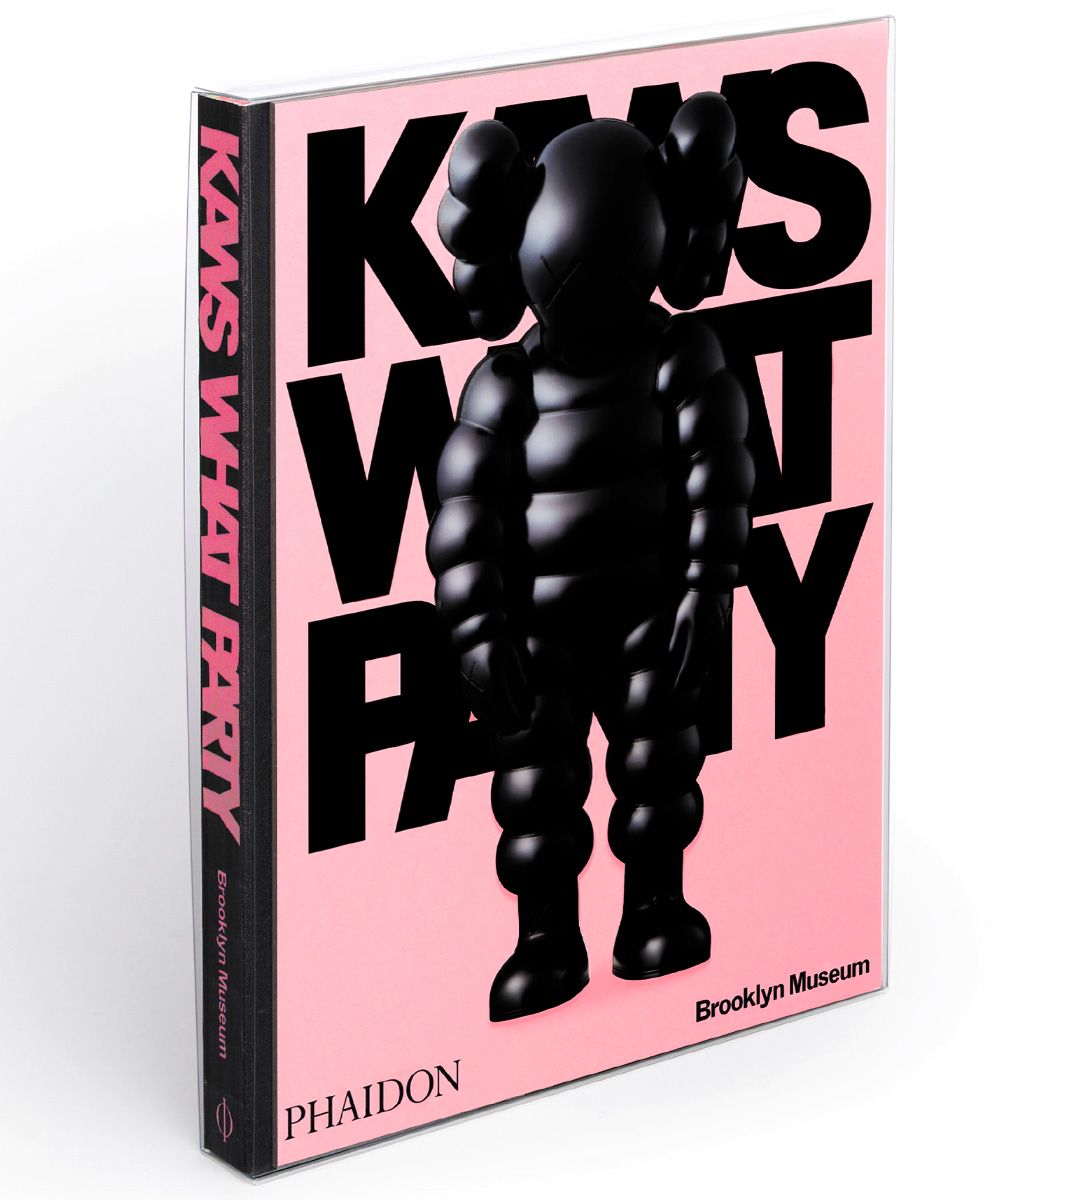 Kaws What Party